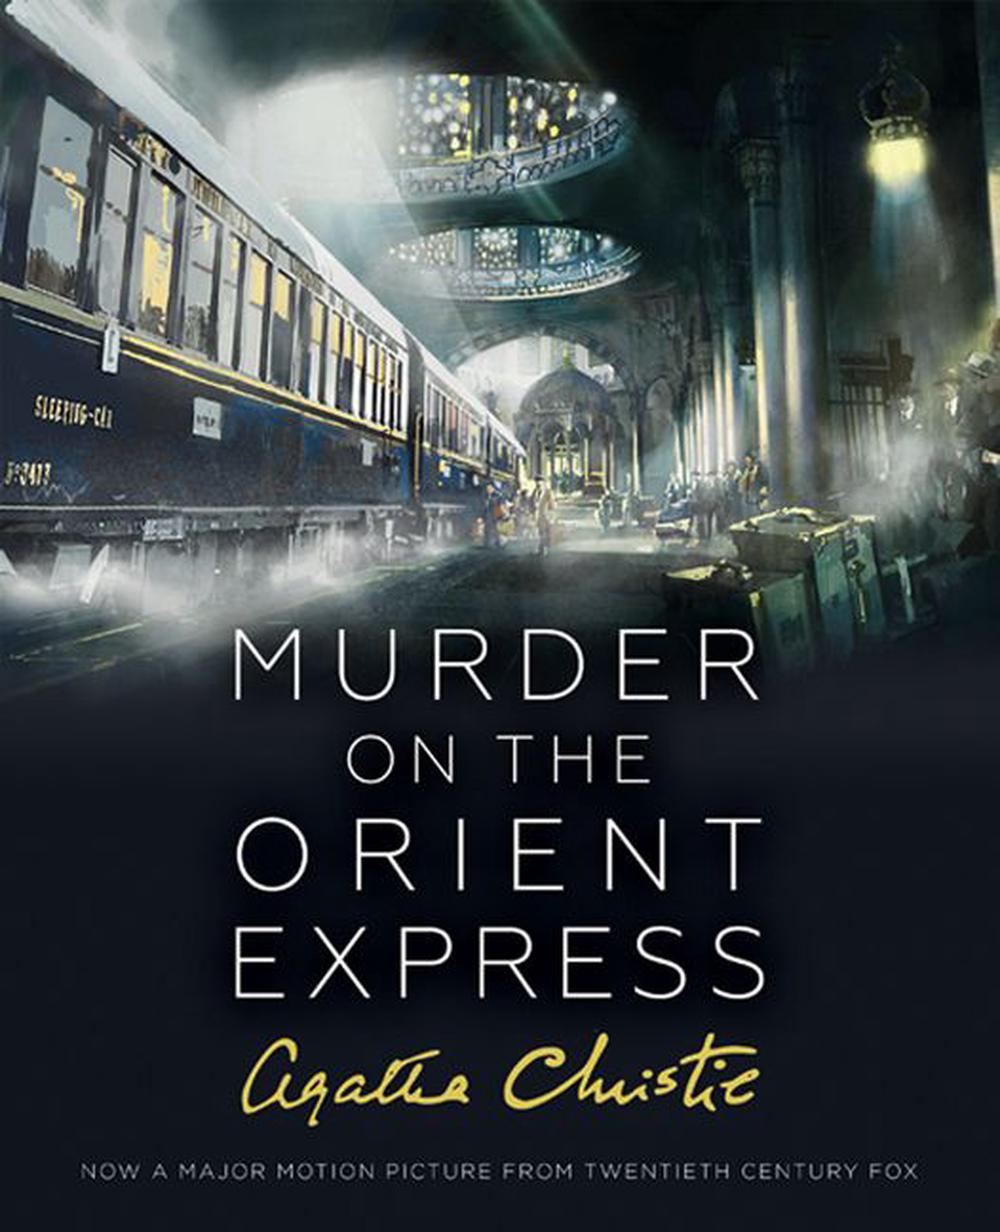 the orient express book